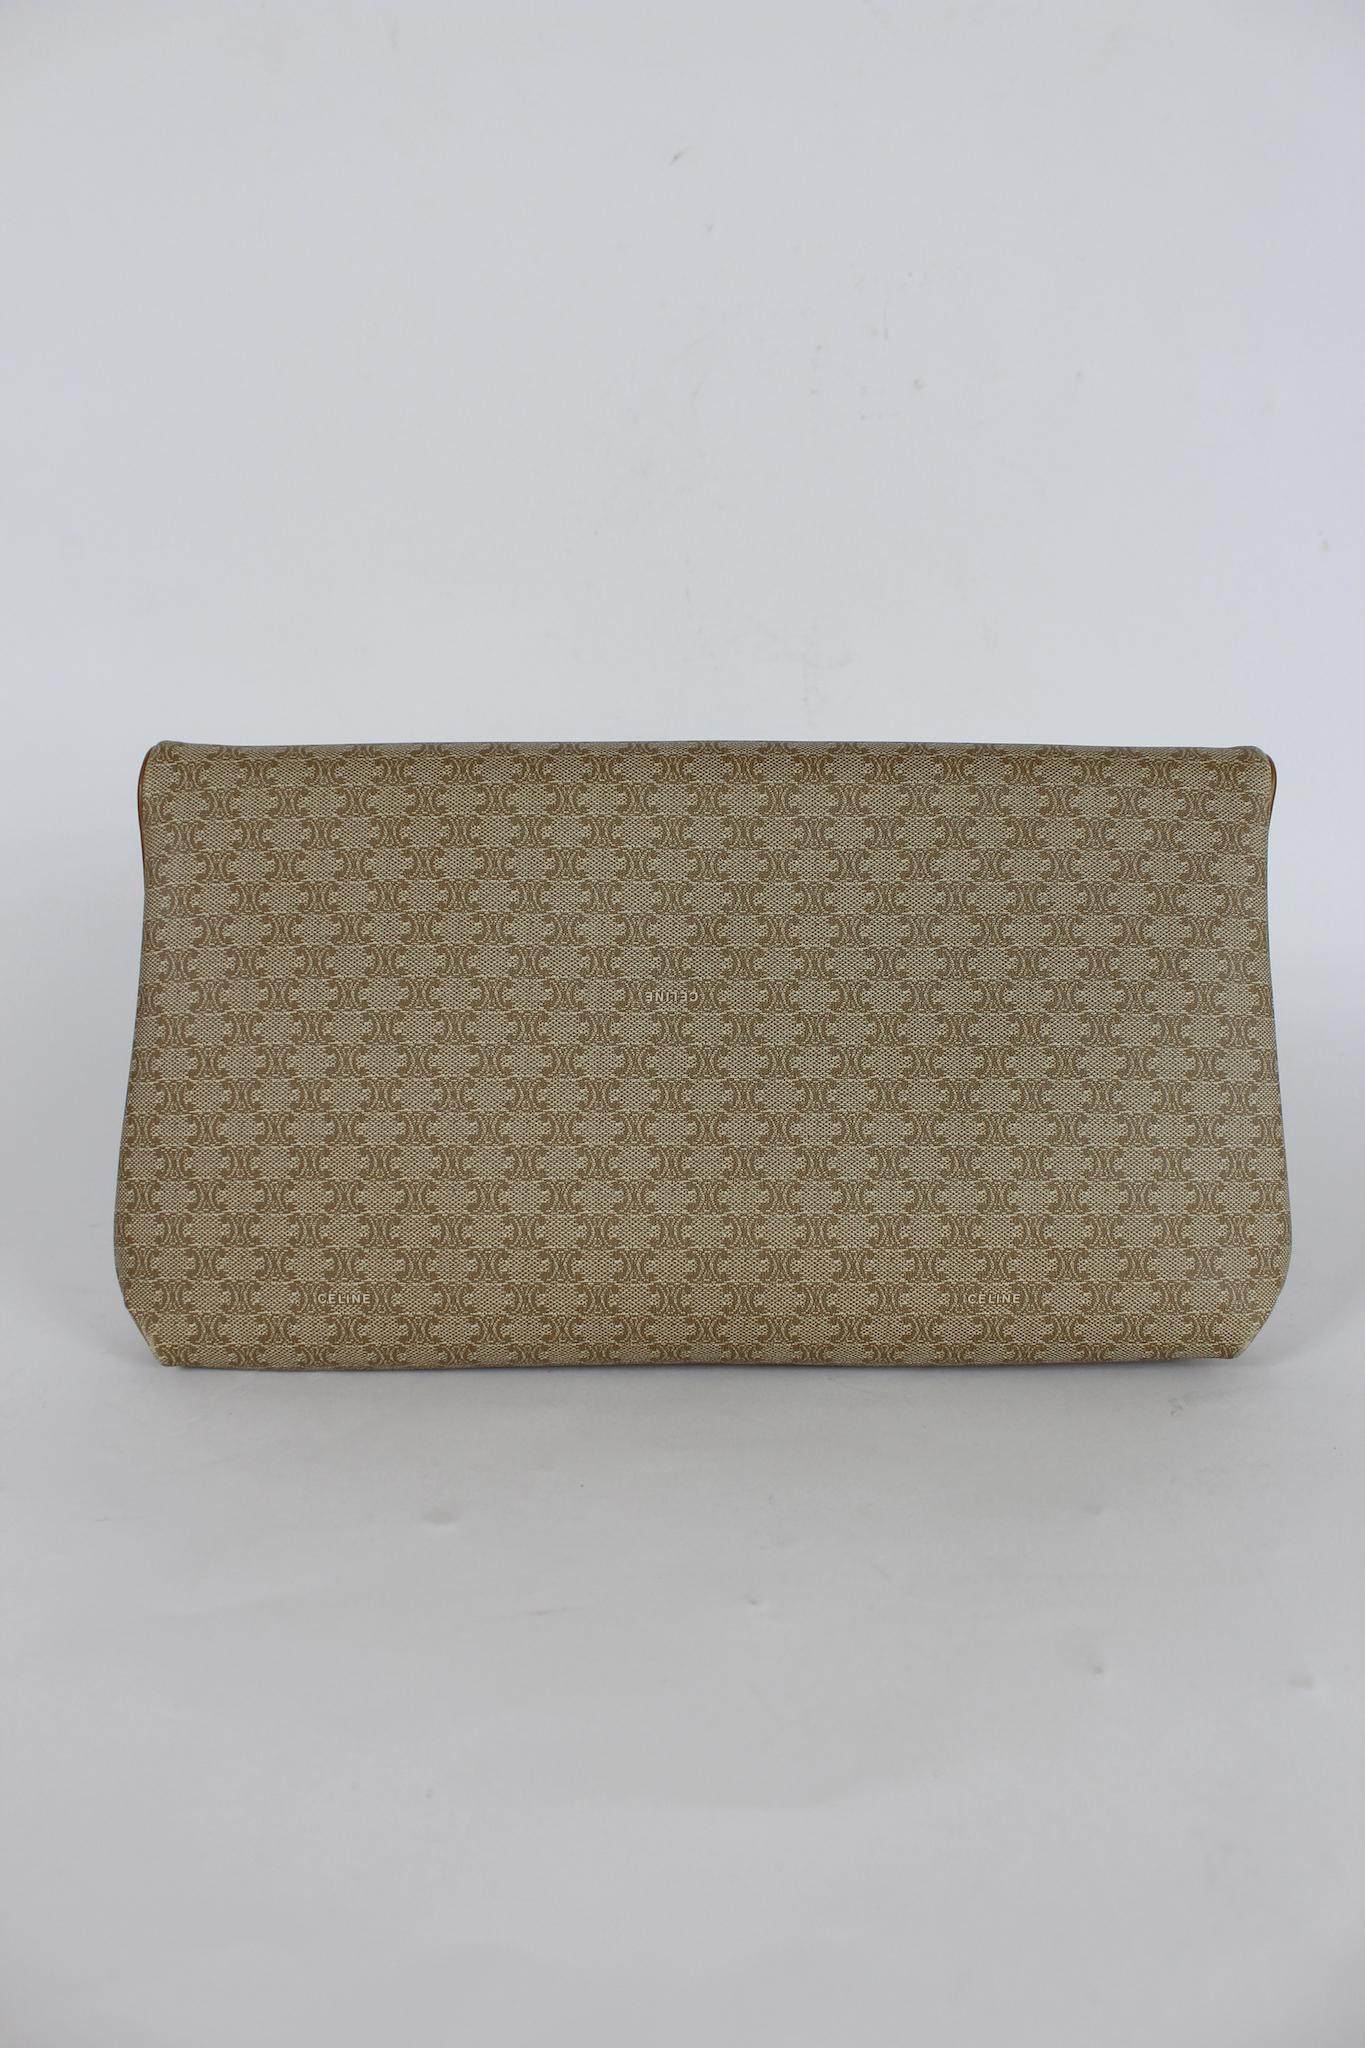 Celine Macadam clutch bag vintage 90's. Bag in canvas and leather profiles, beige and brown monogram color. Foldable top with clip button closure, one internal zip pocket. Made in Italy.

Internal code: M07

Width: 34 cm
Height: 18 cm
Depth: 3 cm
